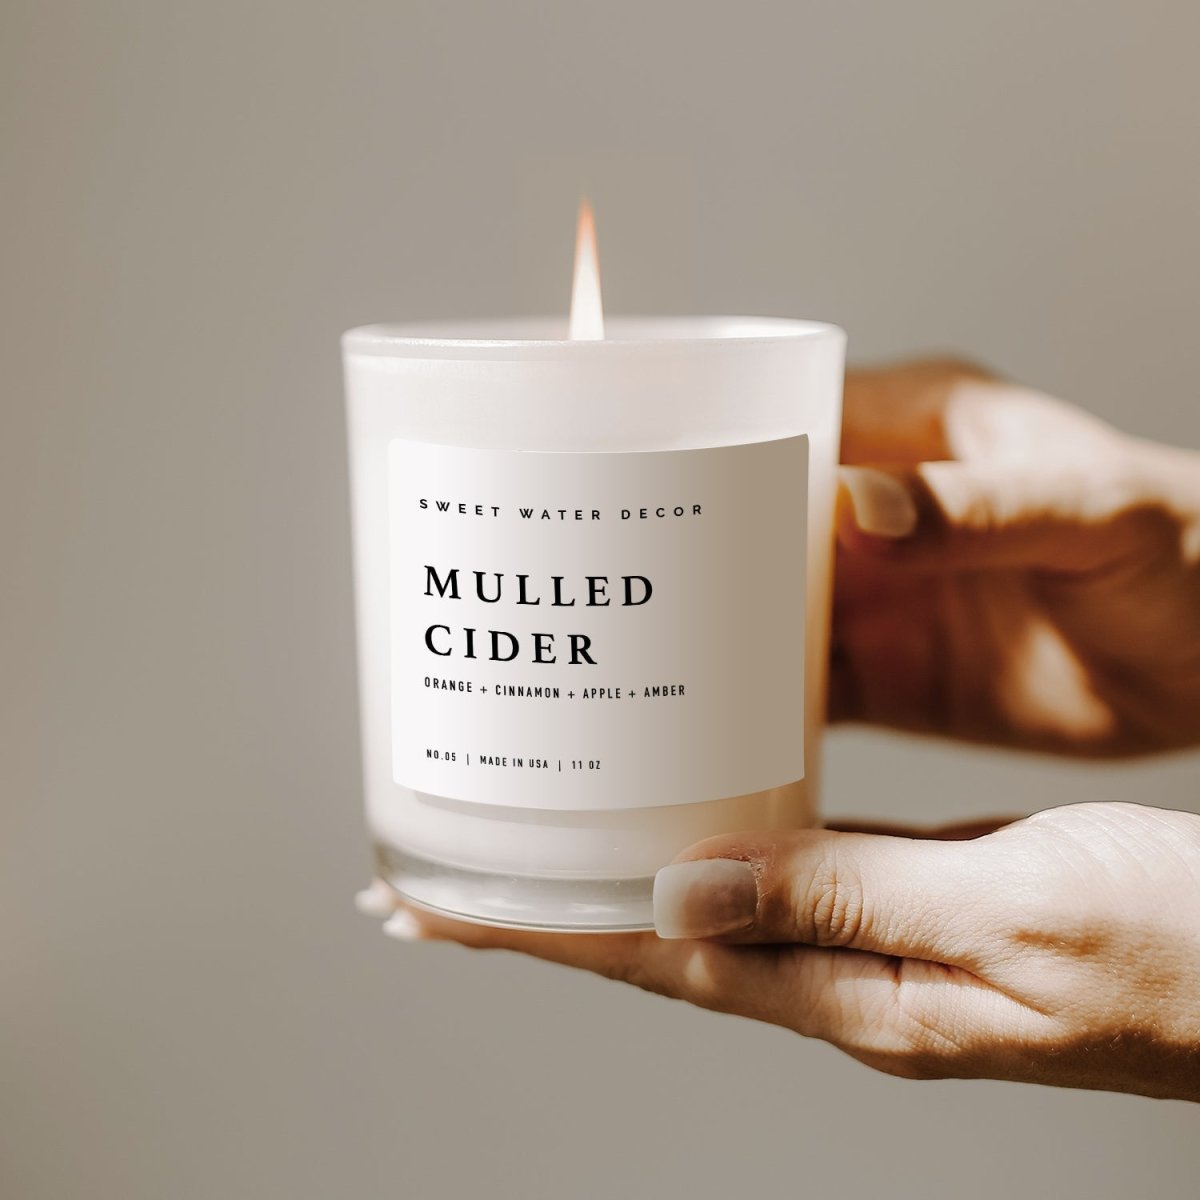 Sweet Water Decor Mulled Cider Soy Candle - White Jar - 11 oz - lily & onyx